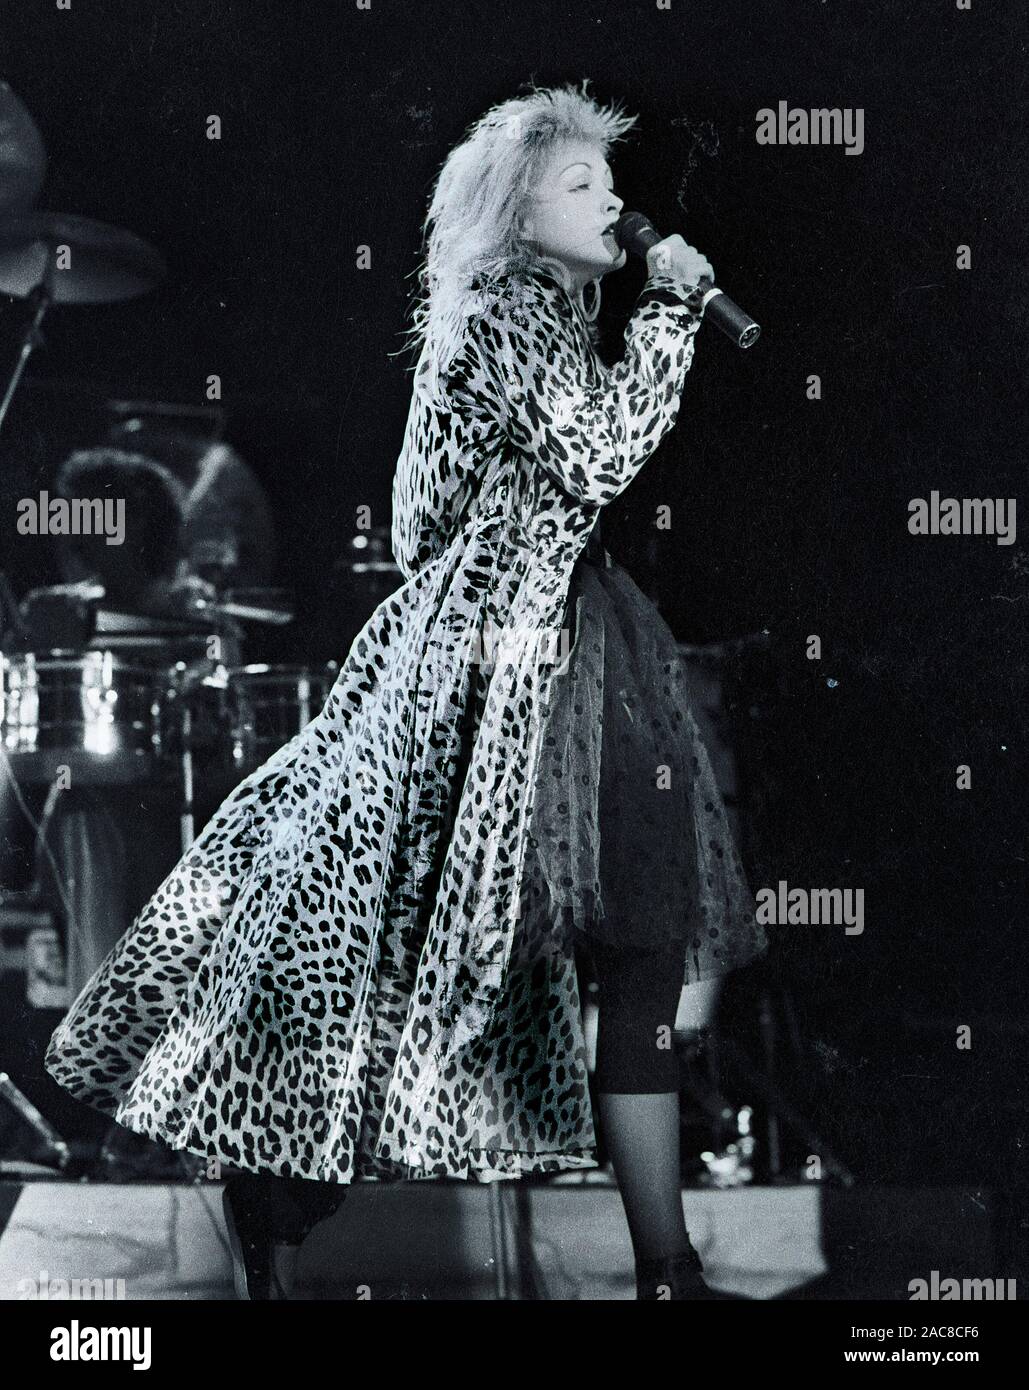 Cyndi Lauper singing in the  “True Colors” tour concert at the Worcester Centruim in worcester Ma USA 1980’s photo by bill belknap Stock Photo